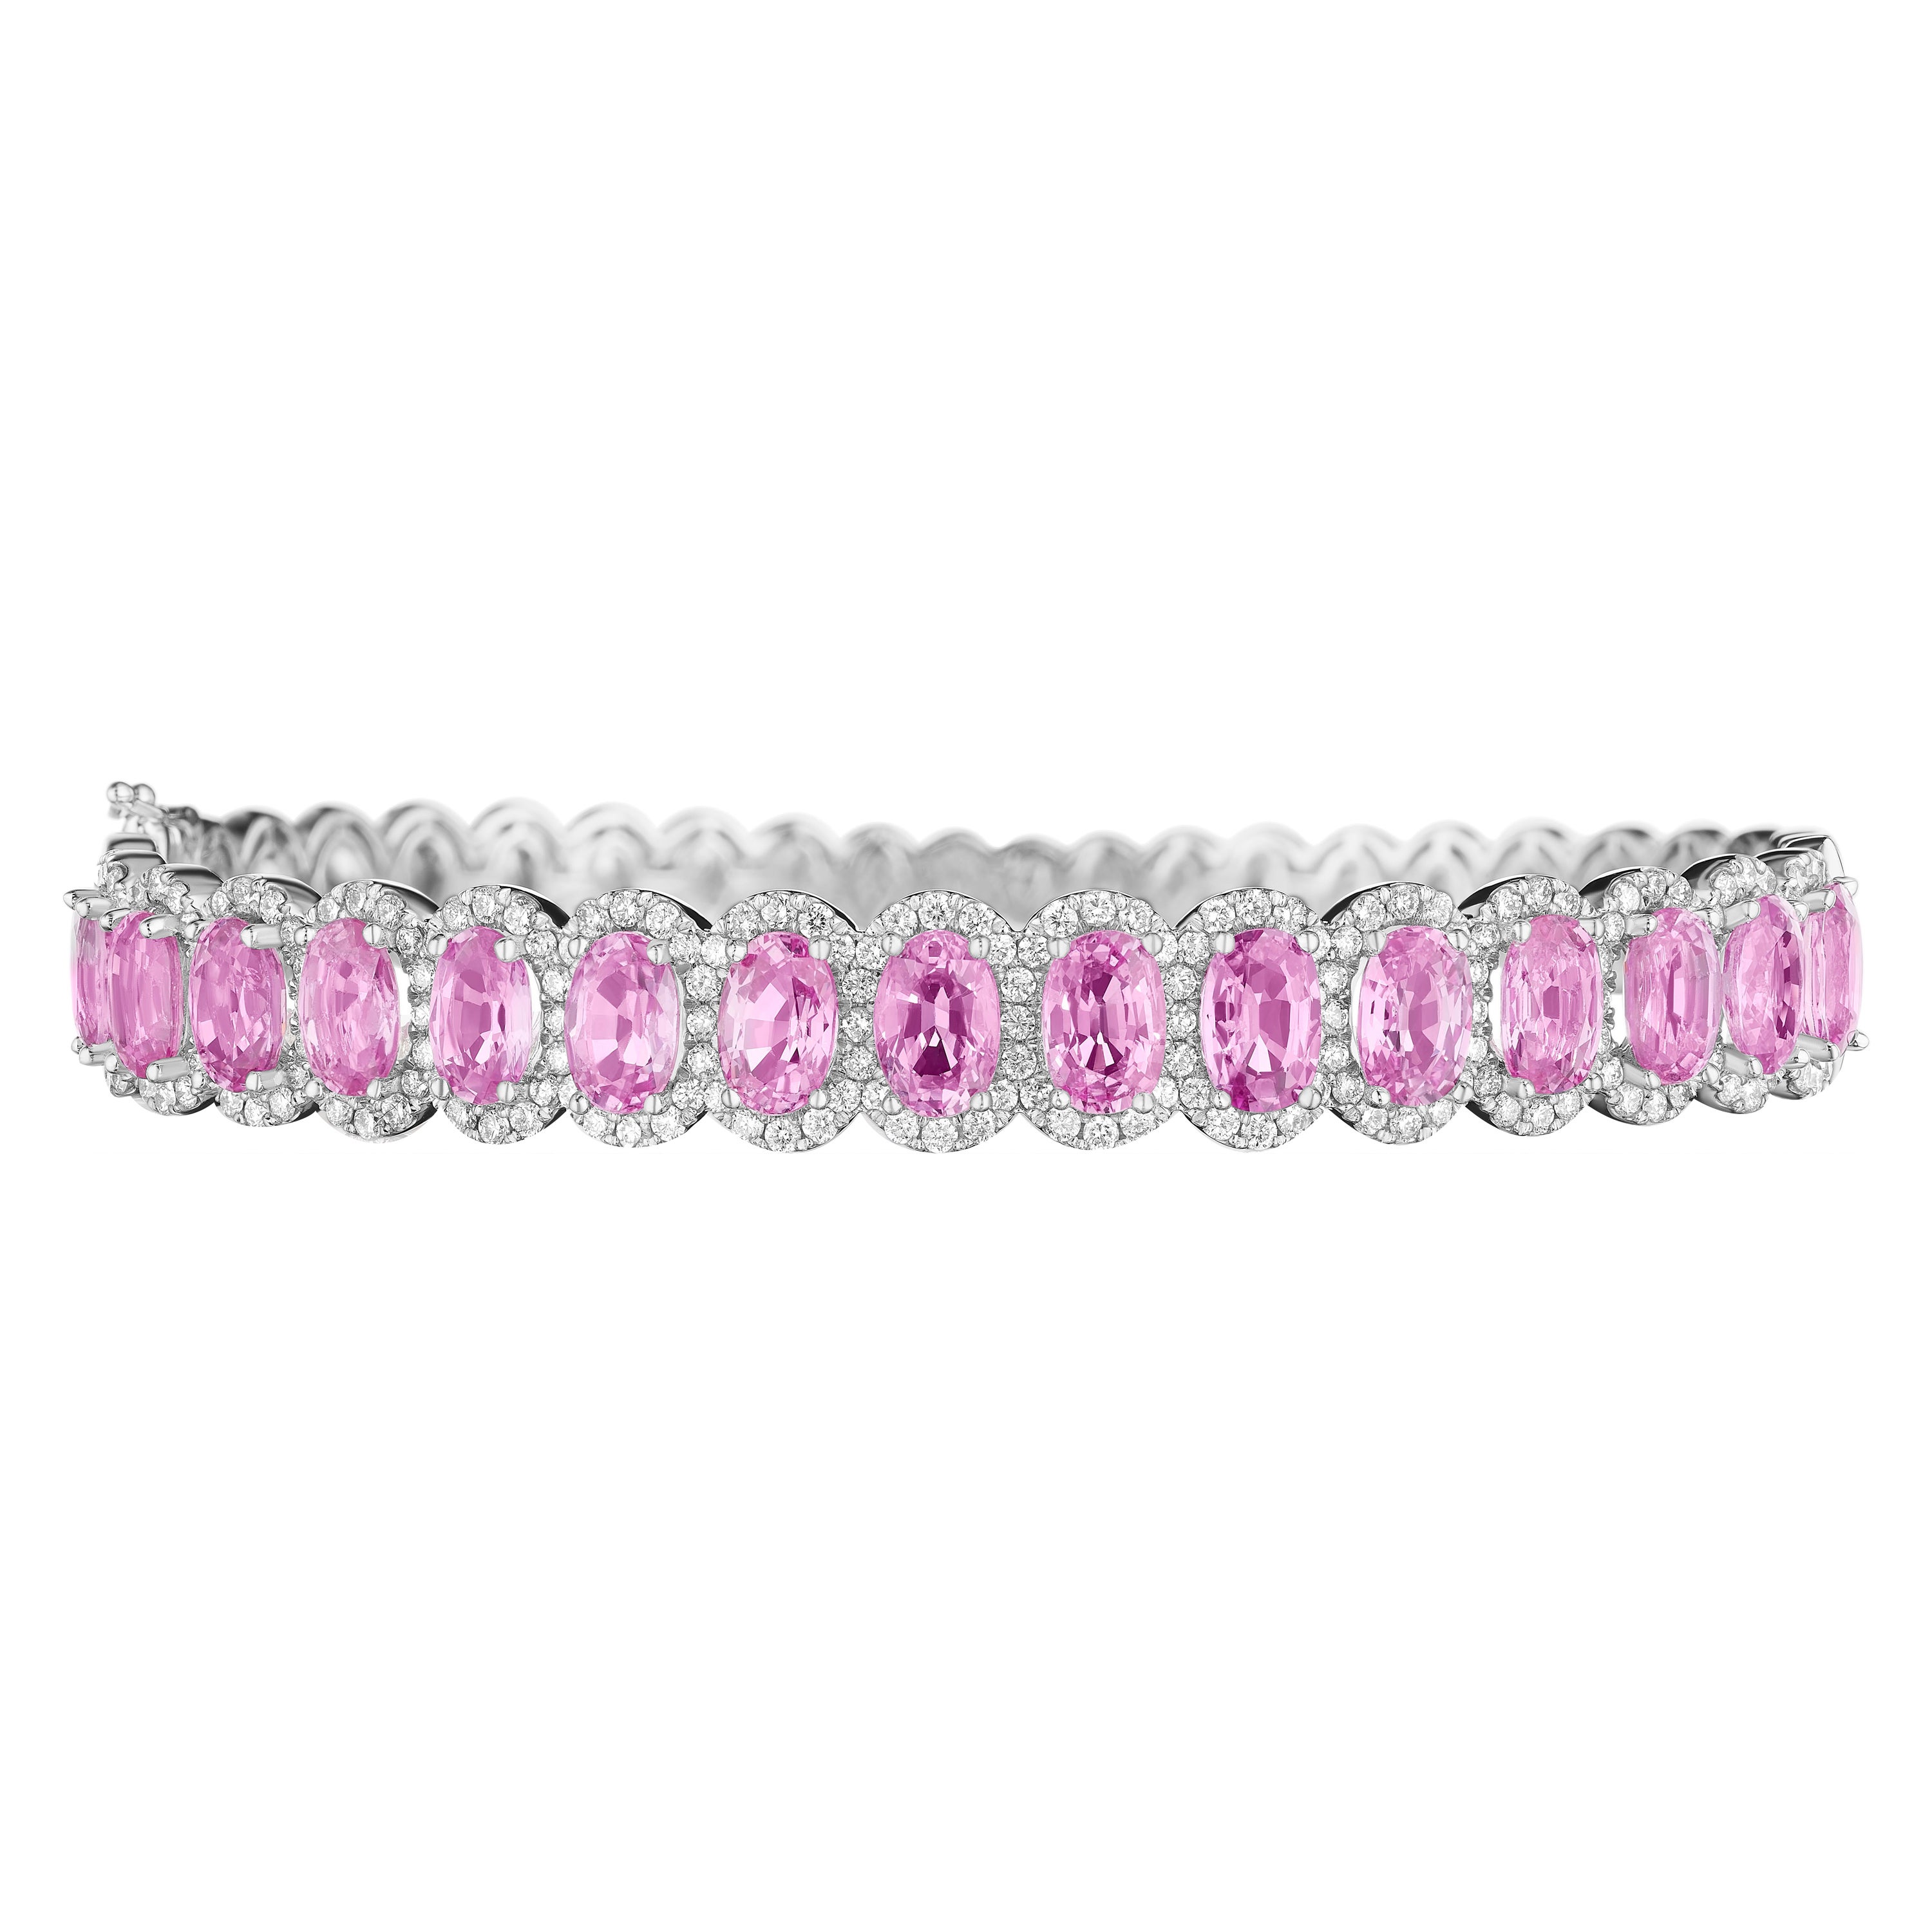 10.35ct Pink Sapphire & Diamond Bangle in 14KT Gold